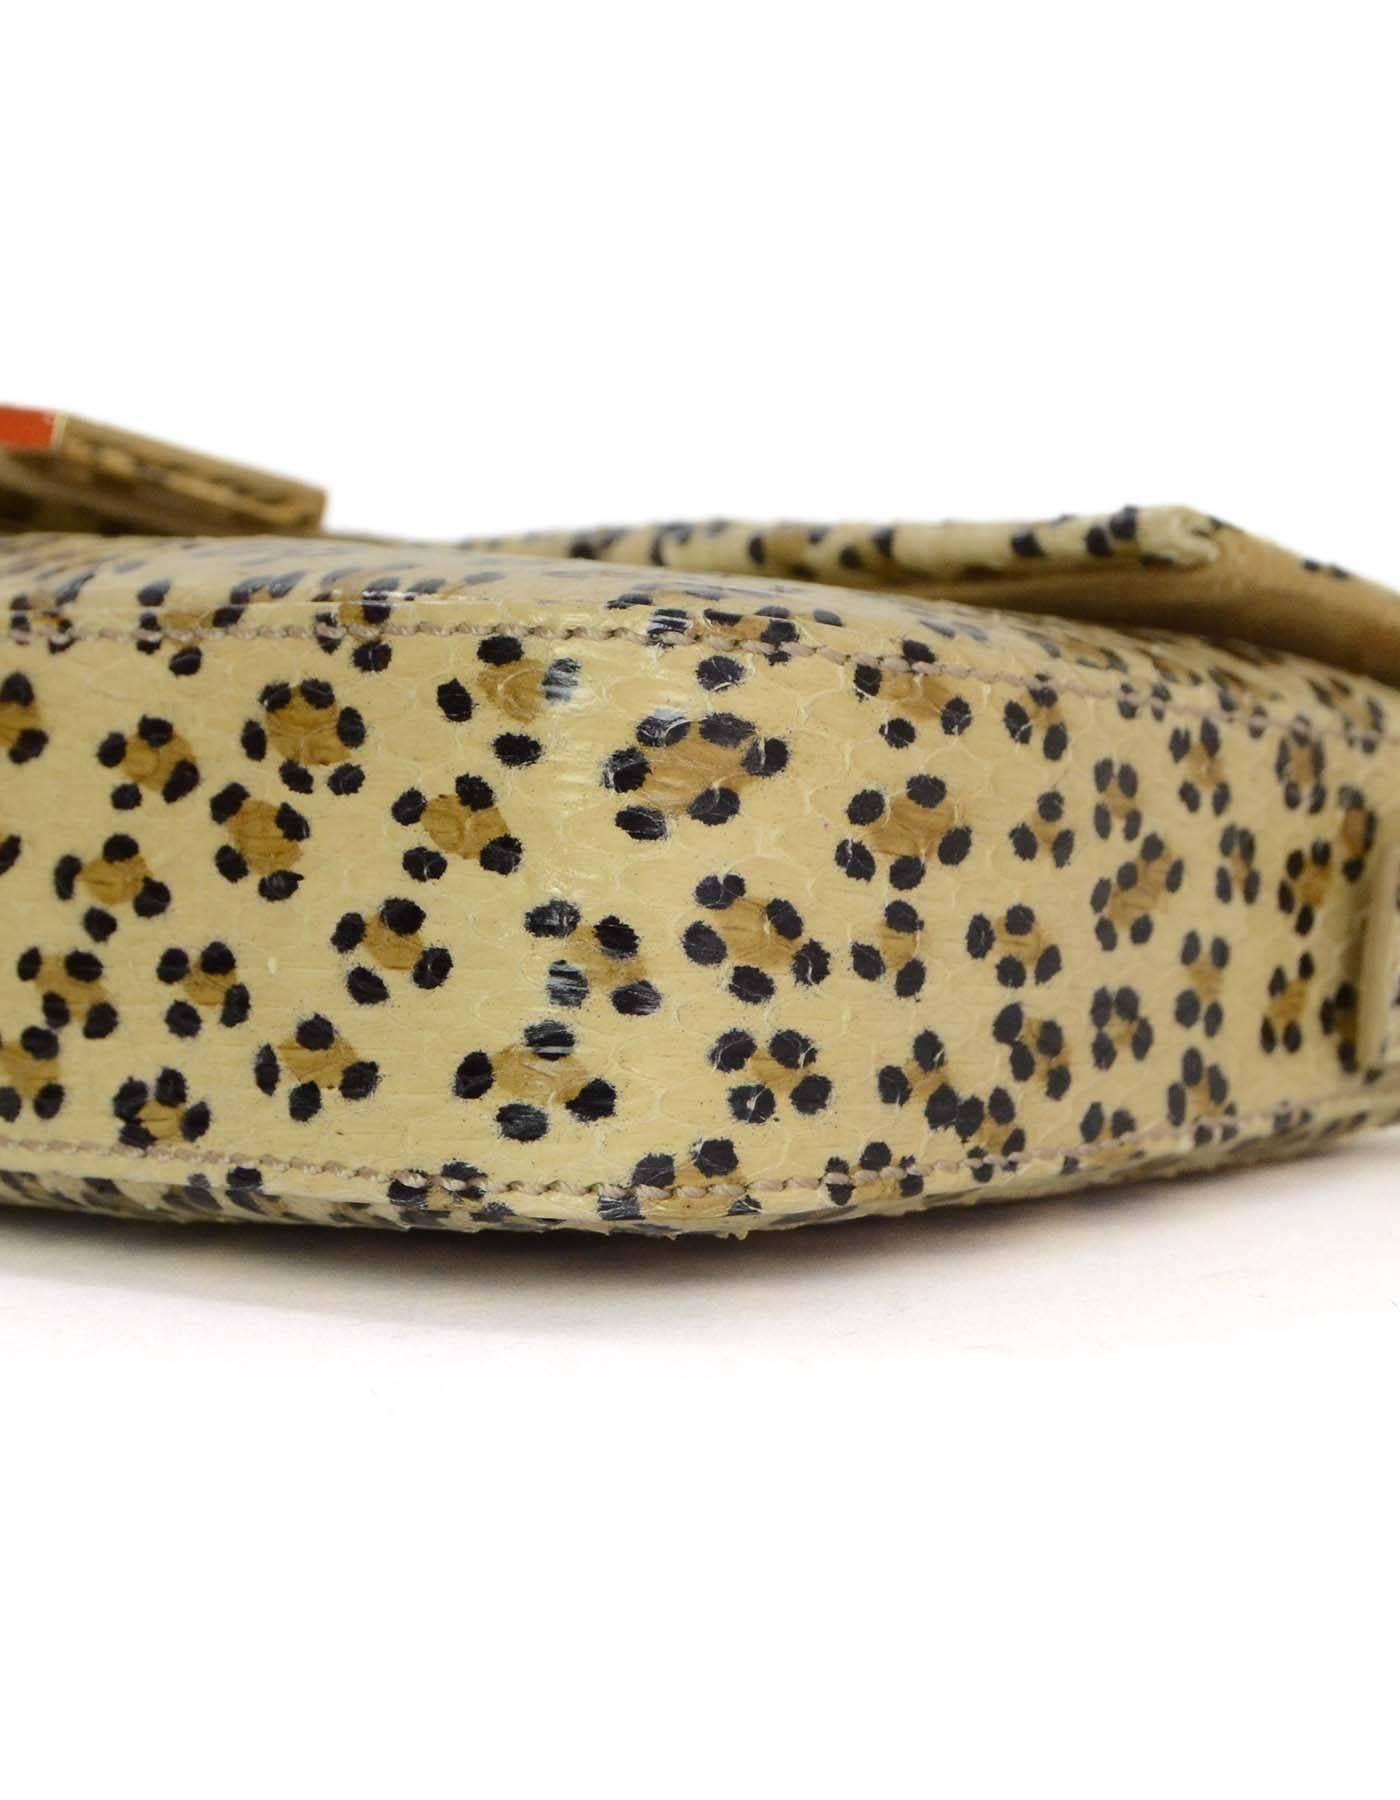 Fendi Beige Leopard Printed Python Baguette/Clutch GHW In Excellent Condition In New York, NY